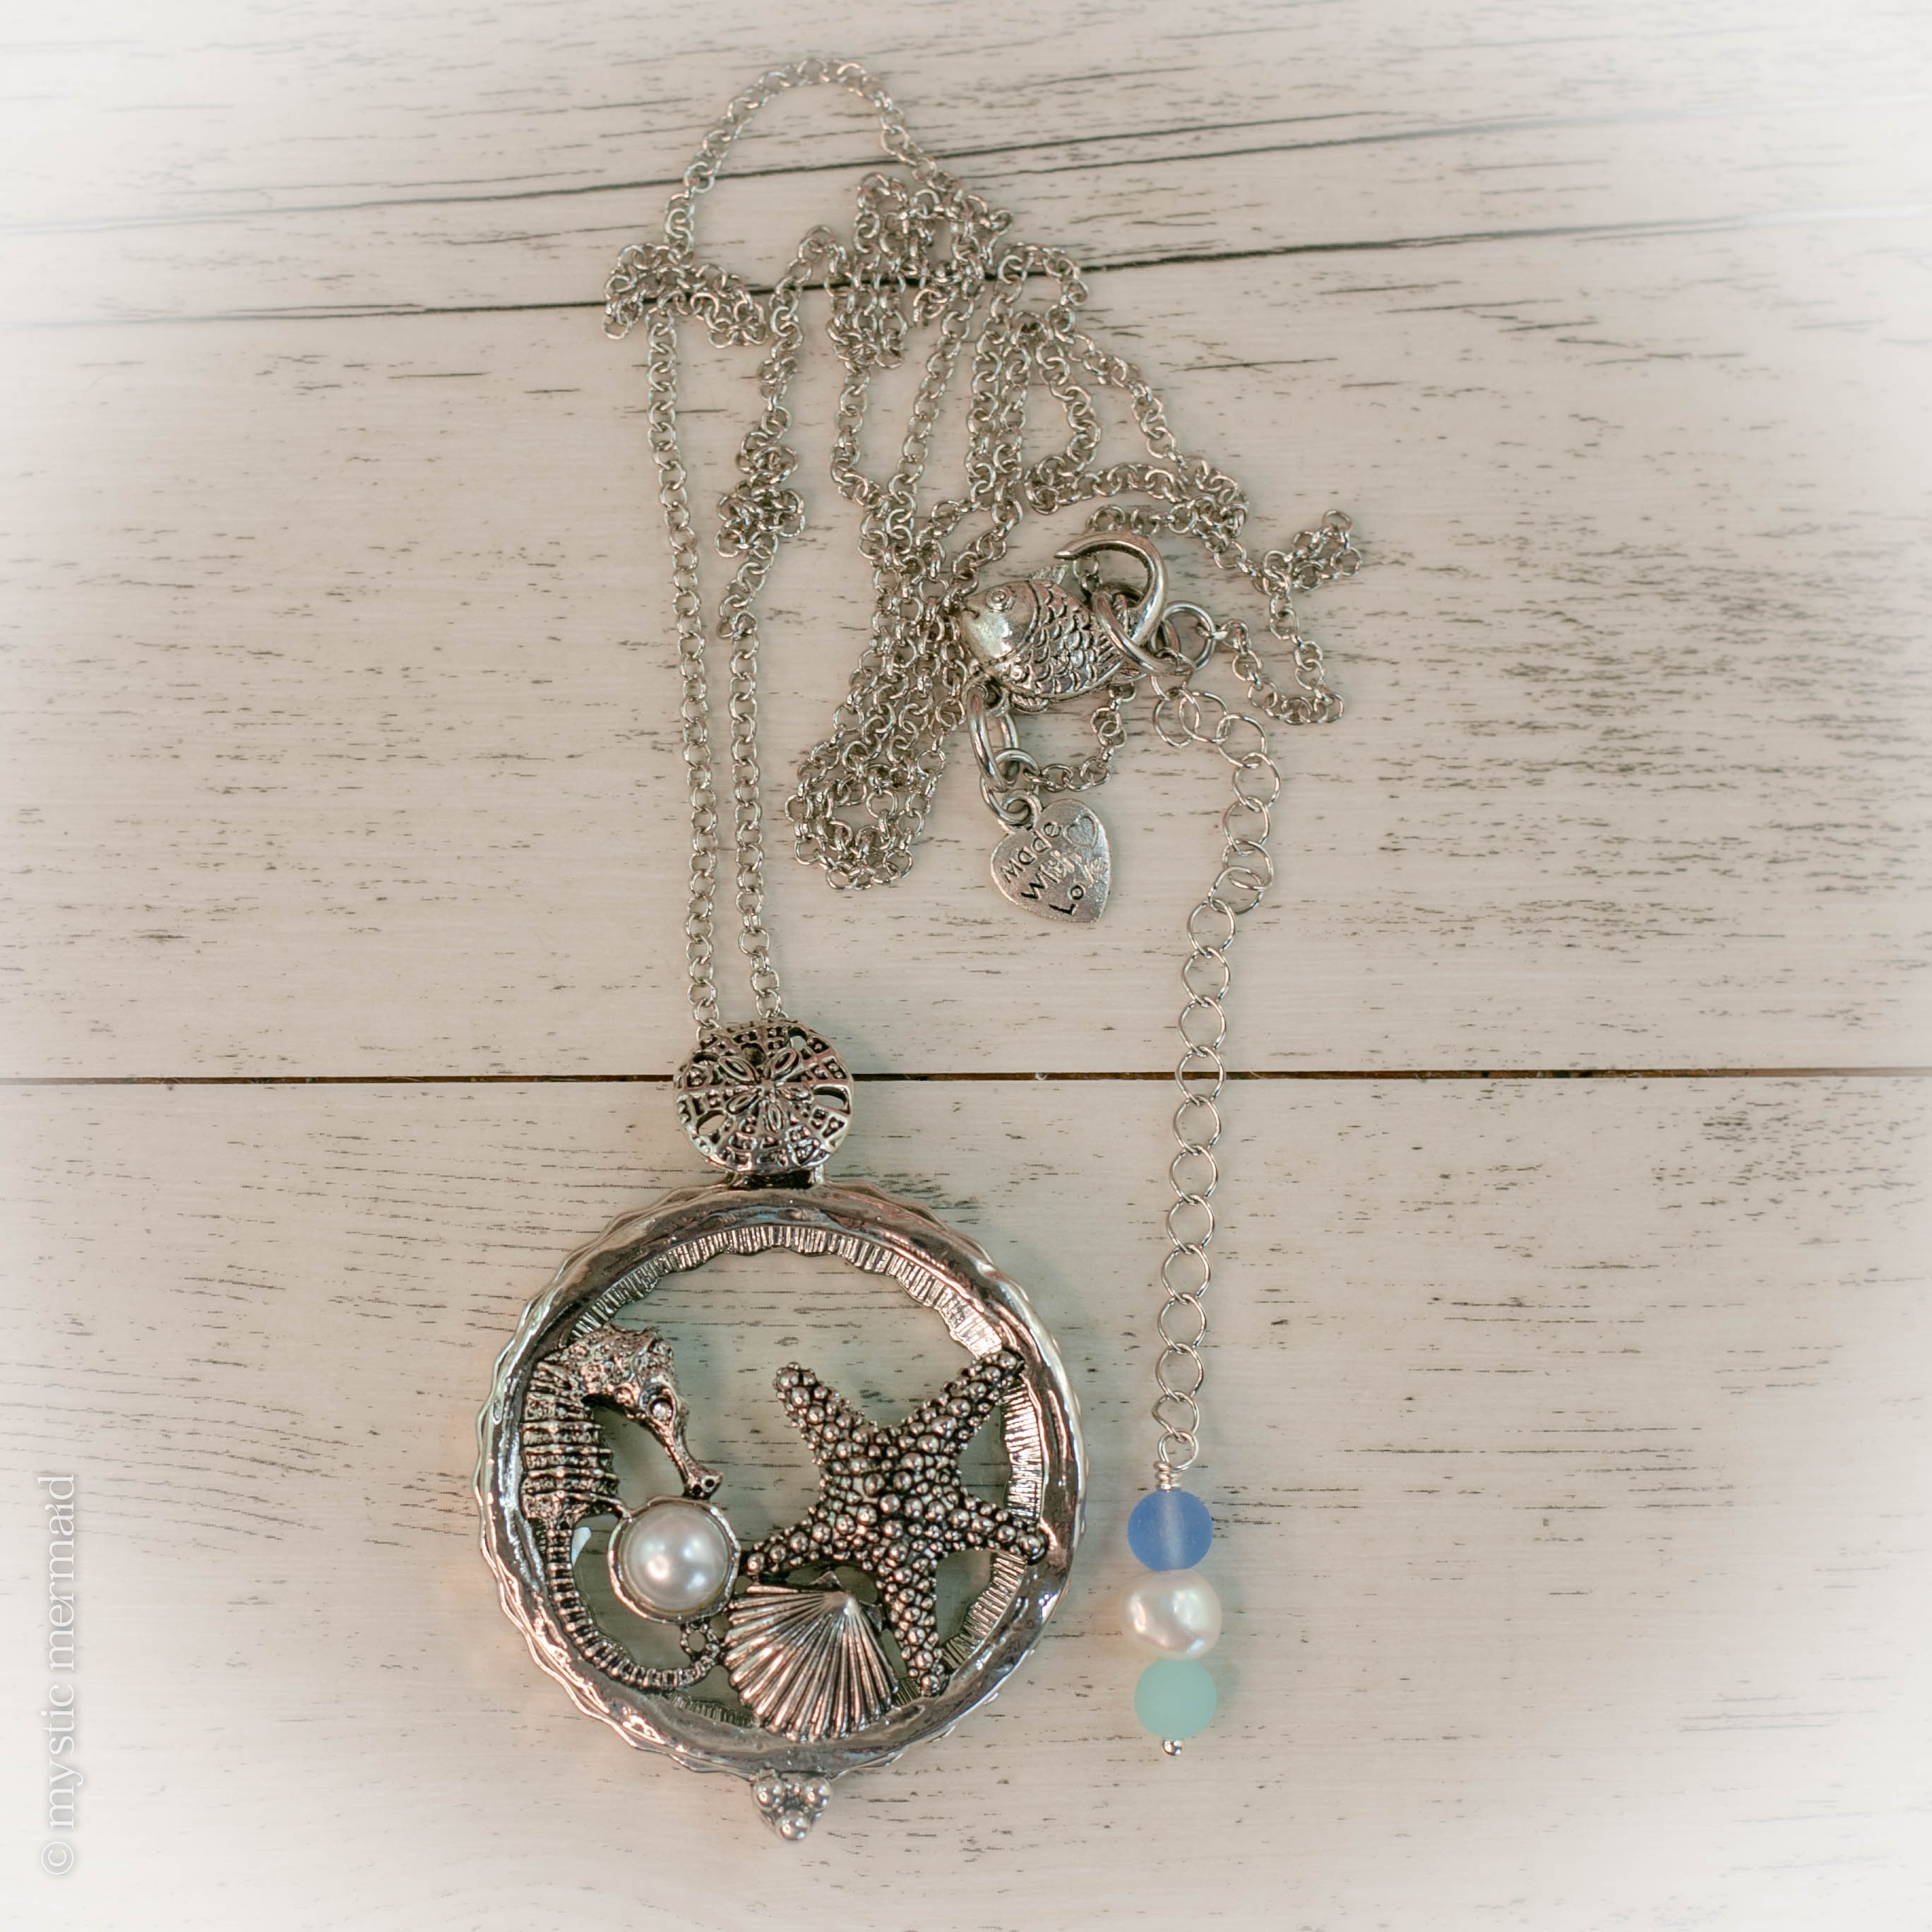 Reach for the Surface Mermaid Magnifying Glass Necklace